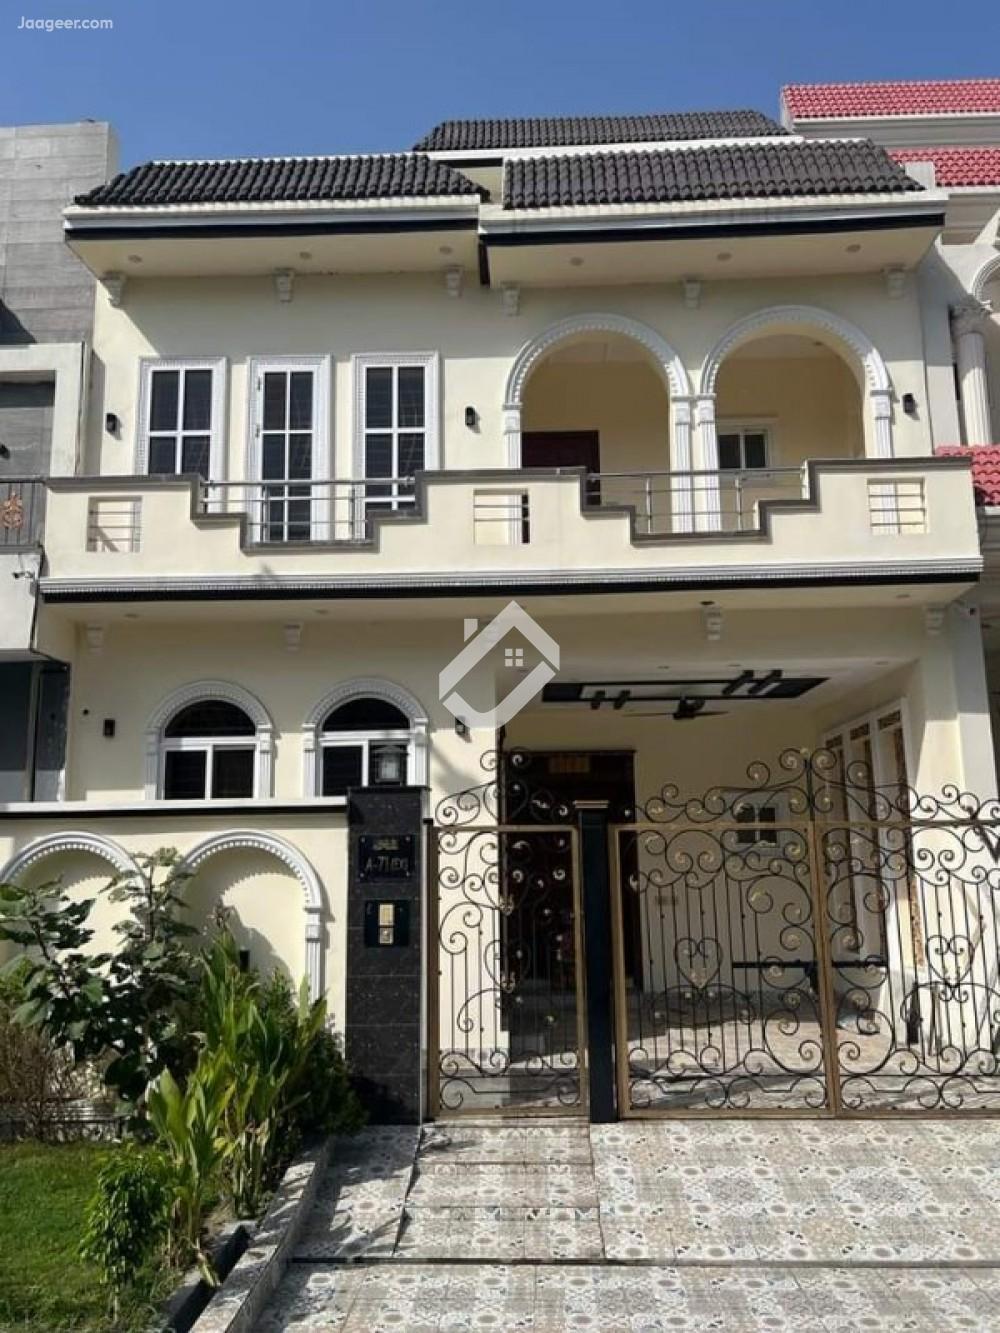 Main image 5 Marla Double Storey House For Sale In Citi Housing Phase 2 Citi Housing , Gujranwala